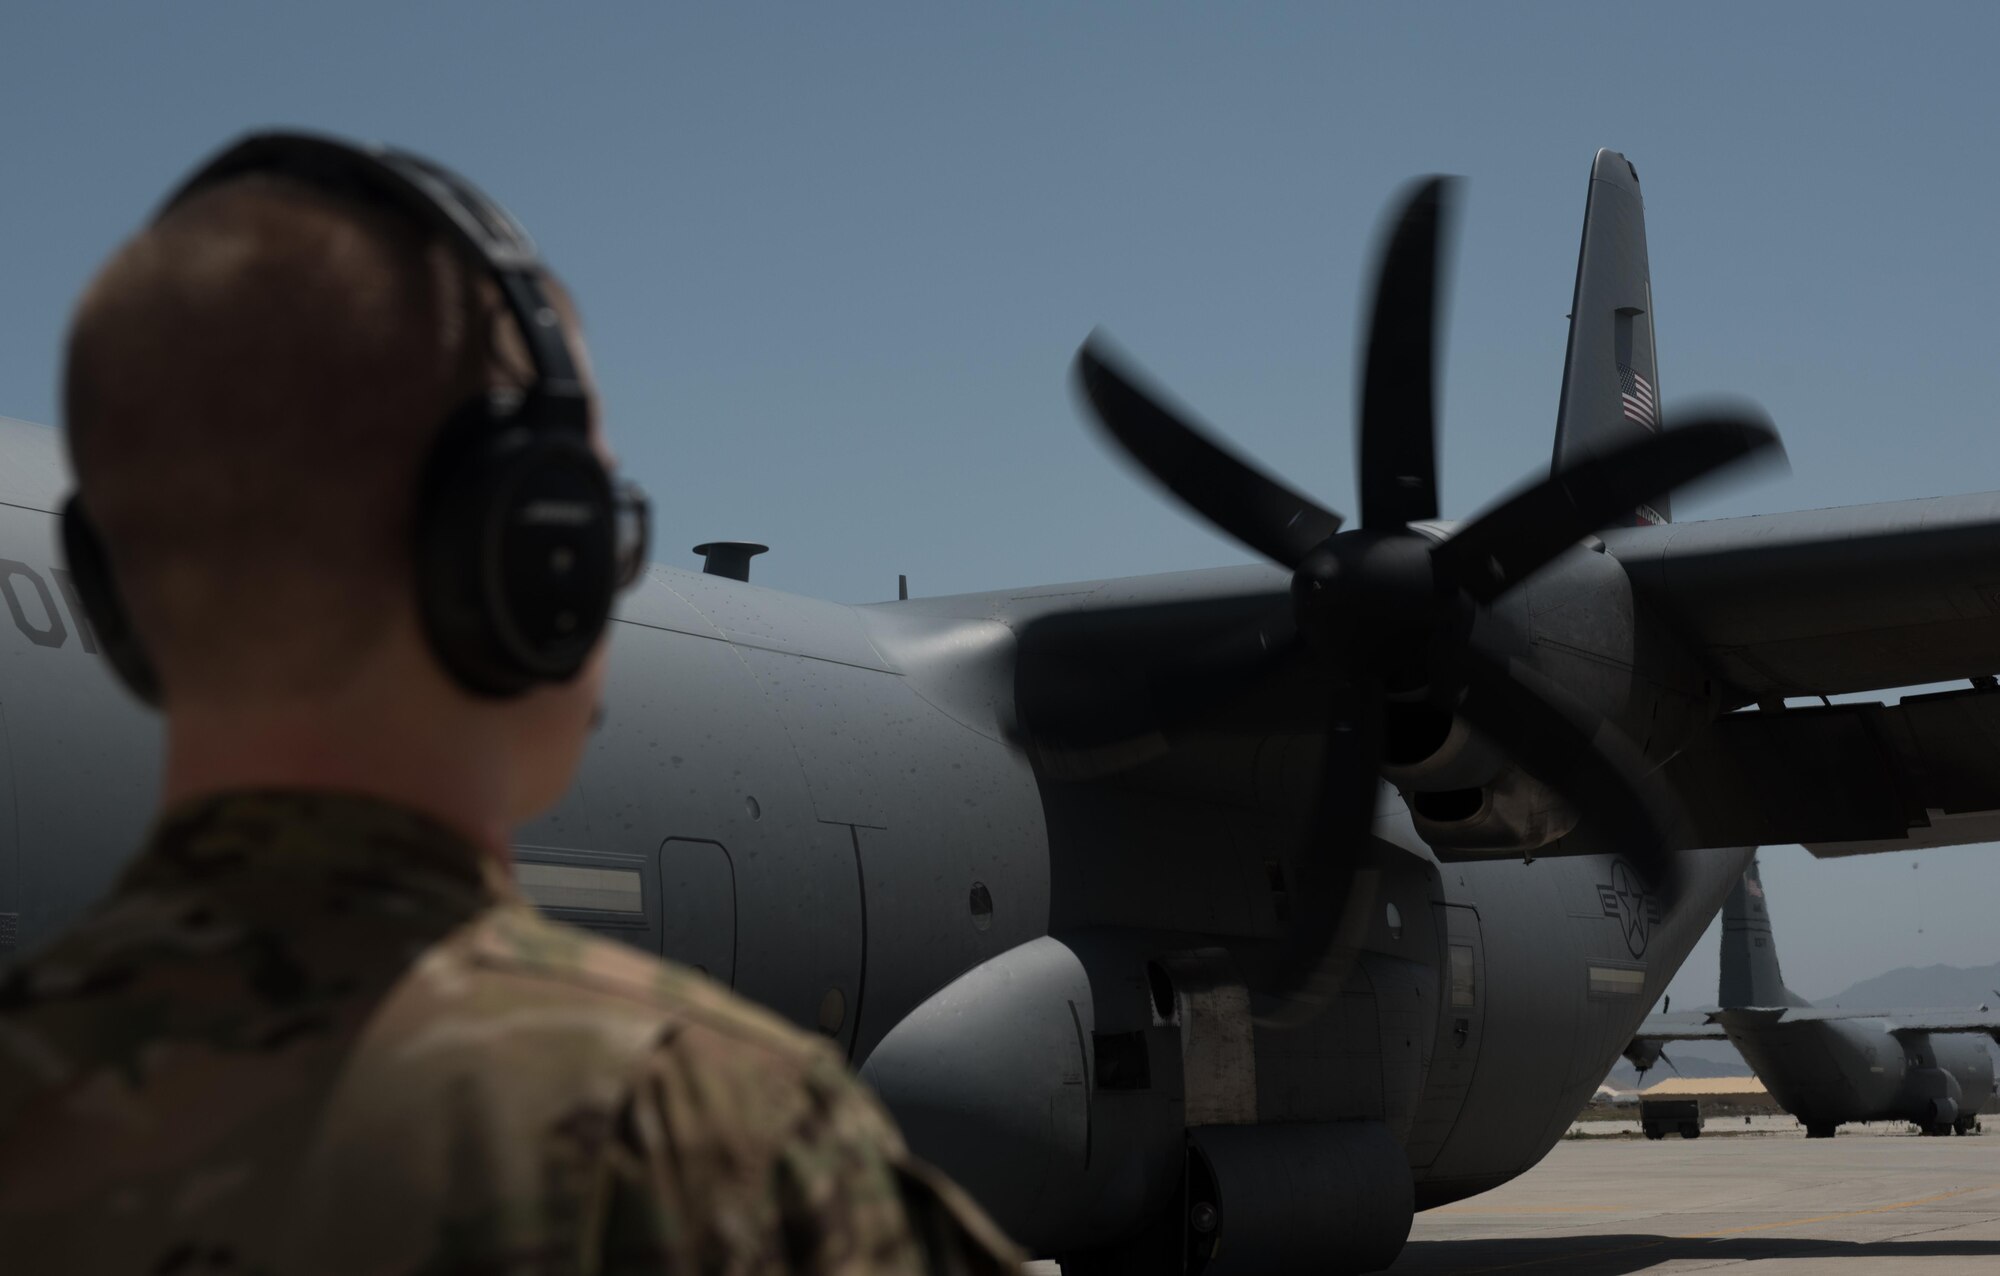 Senior Airman Brandon King, a 774th Expeditionary Airlift Squadron loadmaster, inspects the propellers of a C-130J Super Hercules at Bagram Airfield, Afghanistan, May 5, 2017. The 774th EAS provides tactical airlift capabilities in the Afghan theater, which often requires non-standard or outsized cargo and personnel movement. (U.S. Air Force photo by Staff Sgt. Benjamin Gonsier)